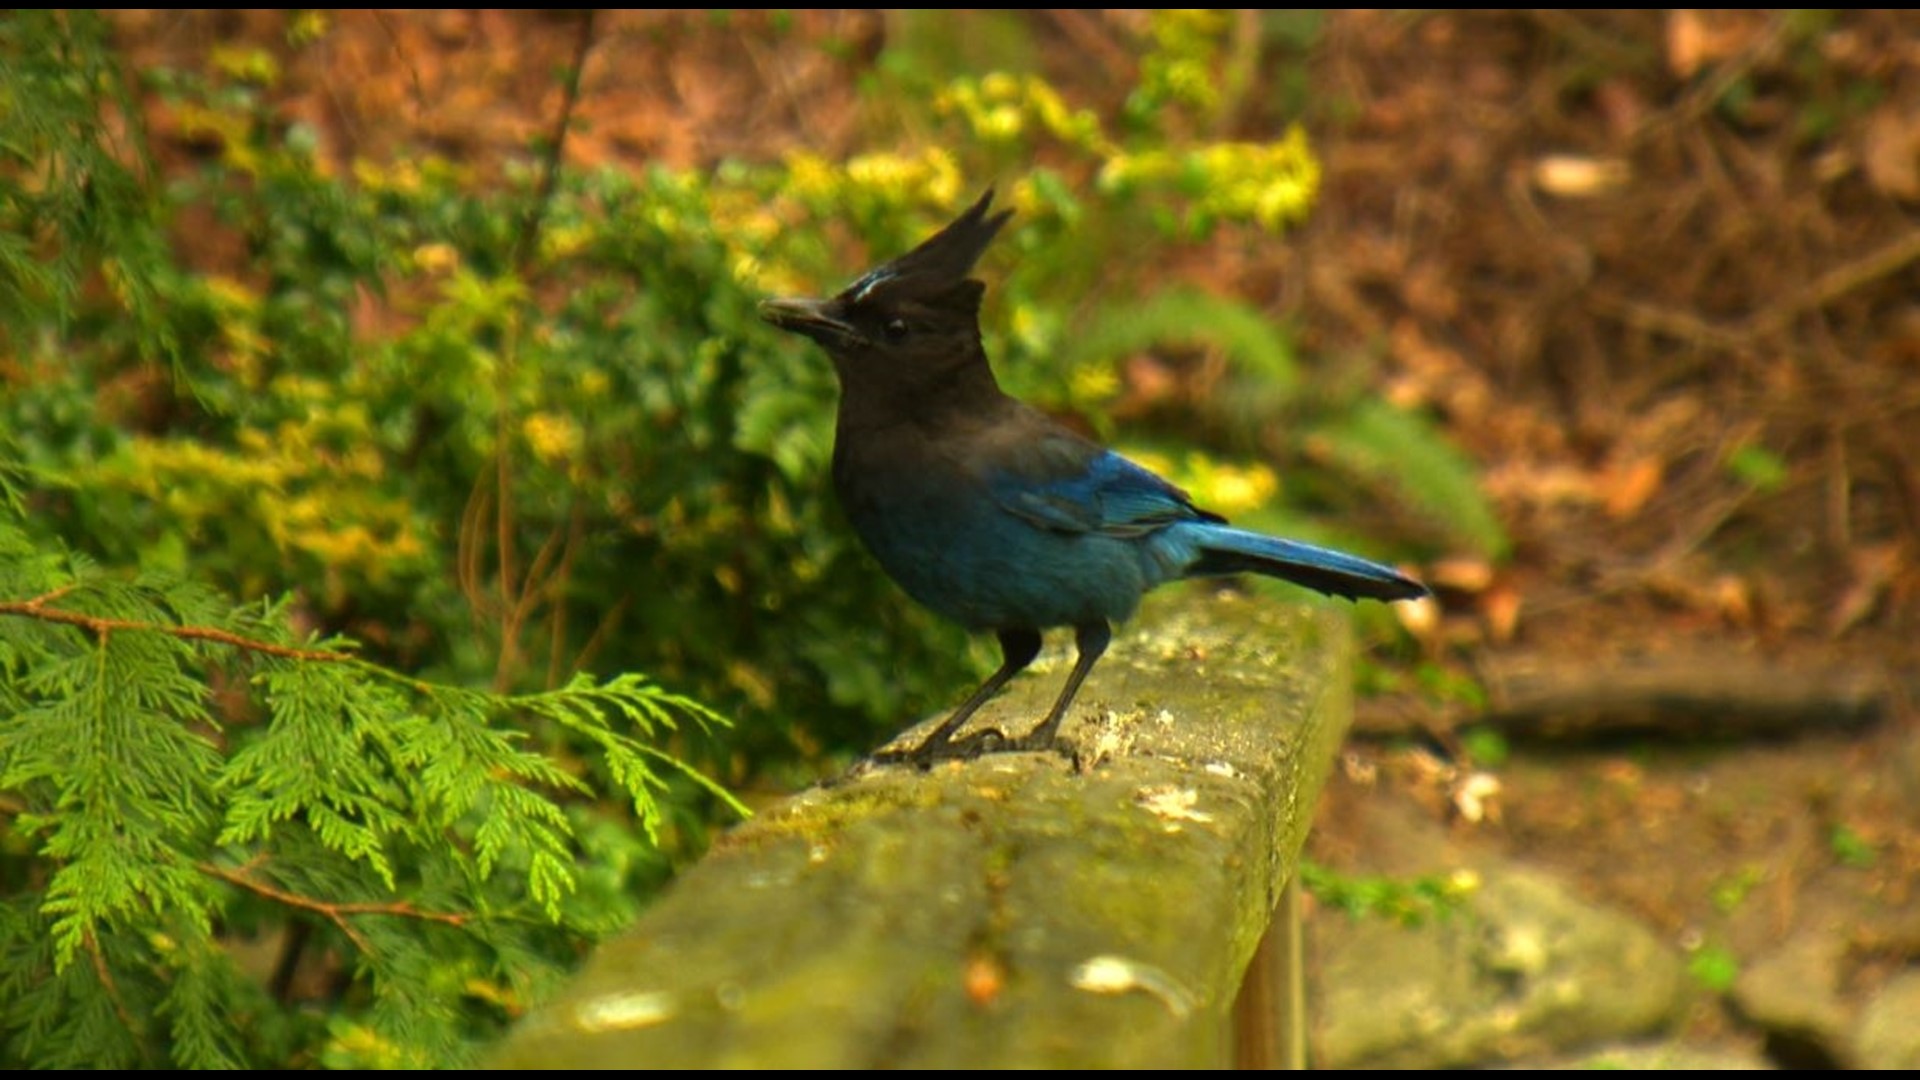 KING 5's Evening devotes a full episode to birding. Its popularity surged during the pandemic and studies show birding can actually improve your mental health.